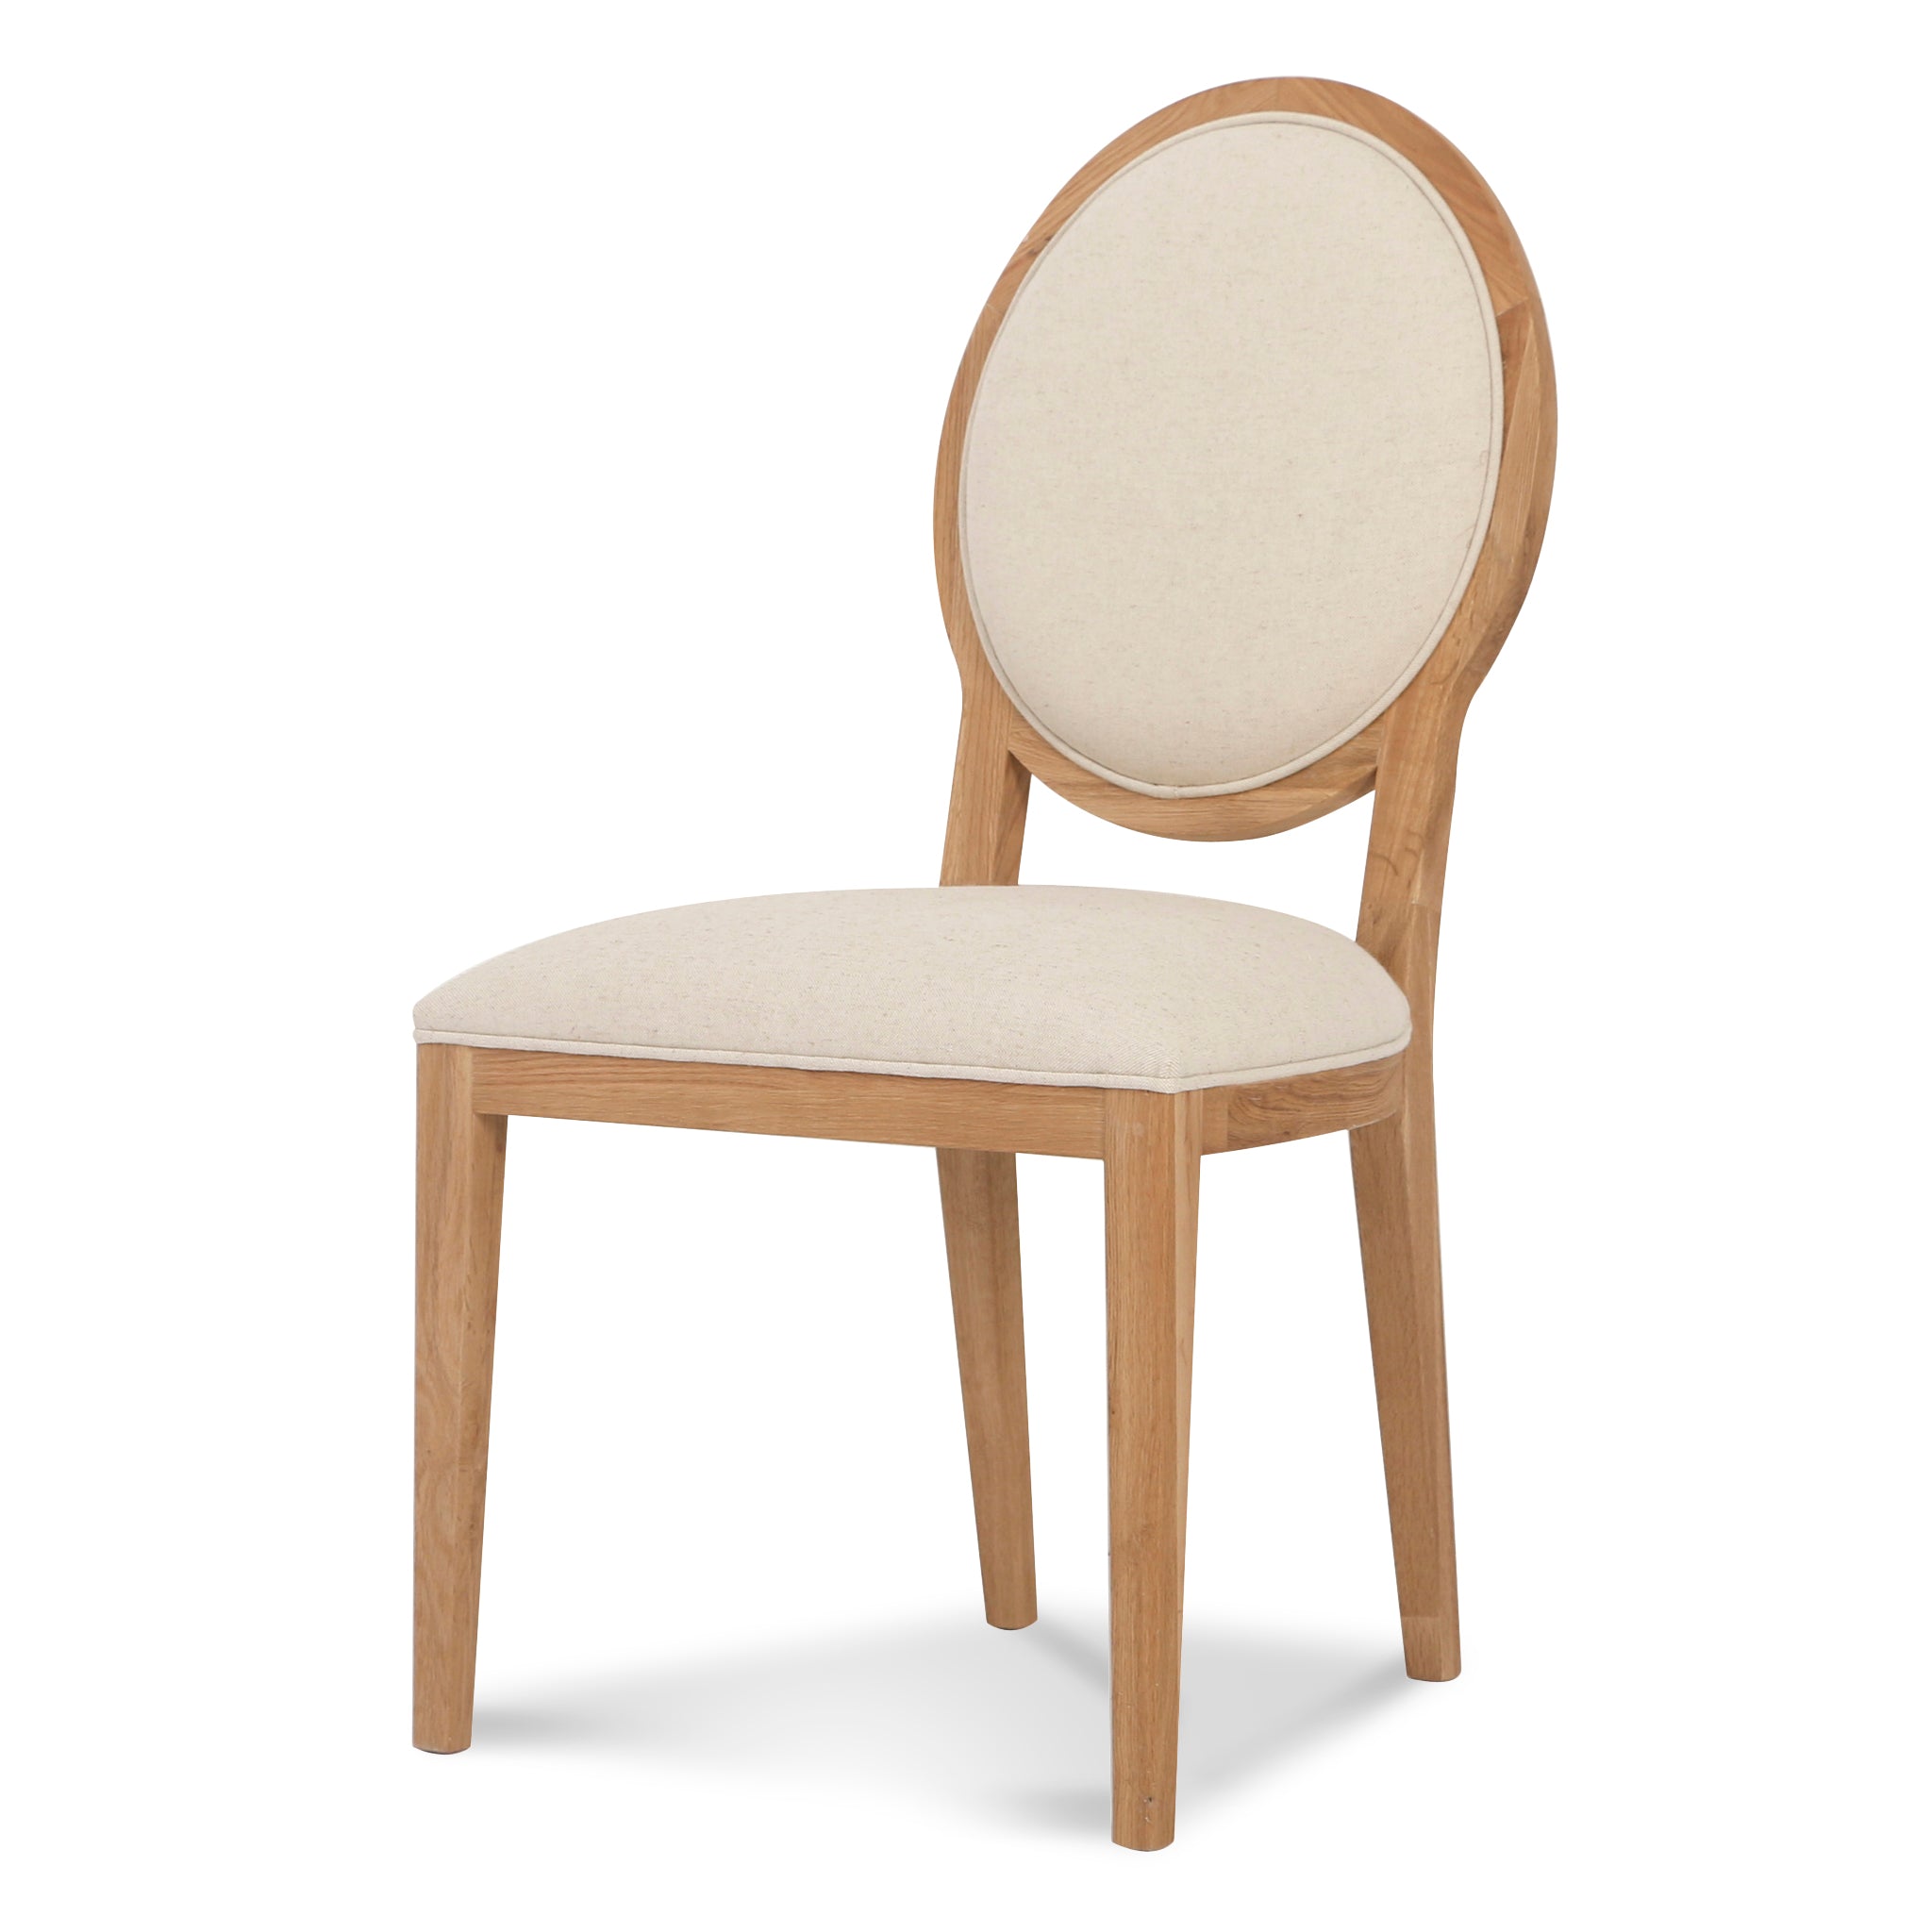 Set of 2 Ayla Fabric Dining Chair - Beige and Natural - Dining Chairs